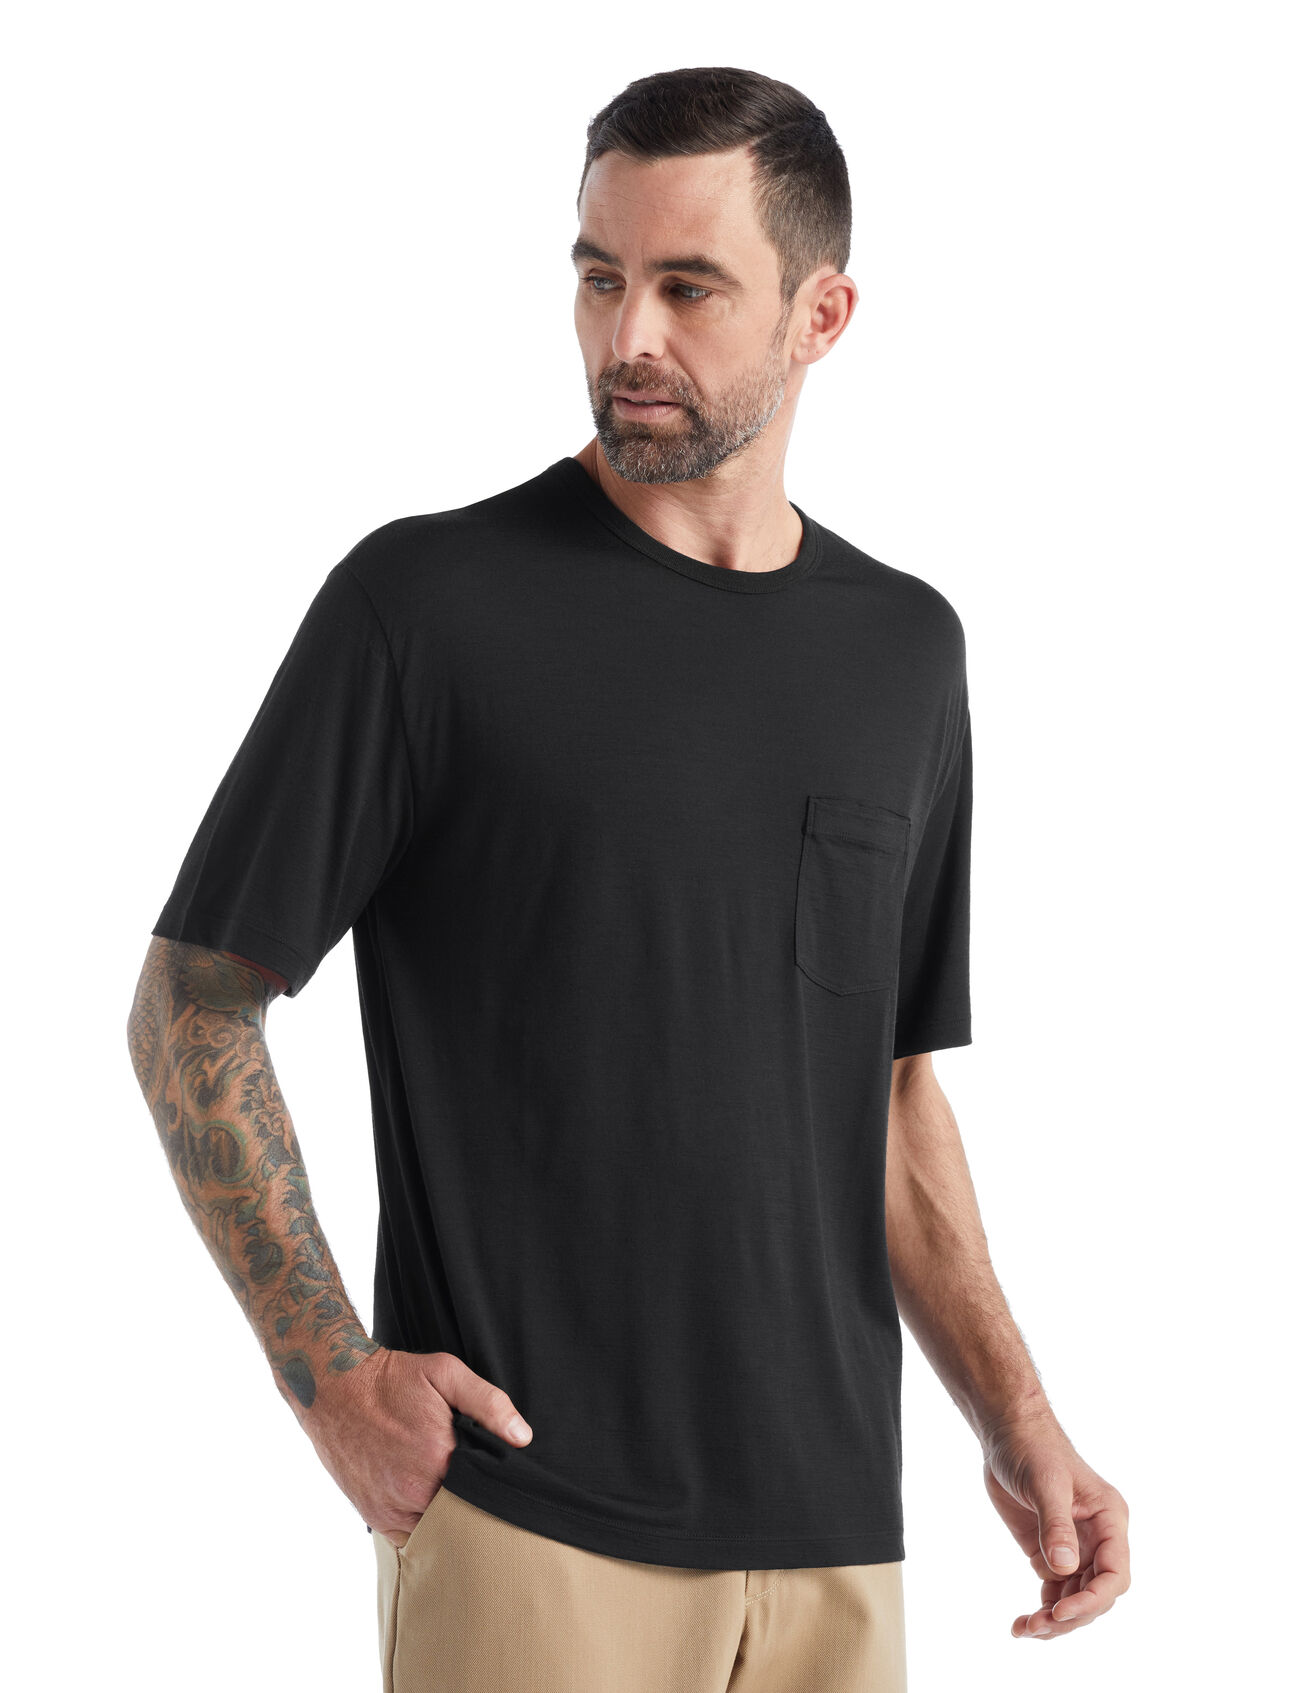 Mens Merino Granary Short Sleeve Pocket Tee A classic pocket tee with a relaxed fit and soft, breathable, 100% merino wool fabric, the Granary Short Sleeve Pocket Tee is all about everyday comfort and style.